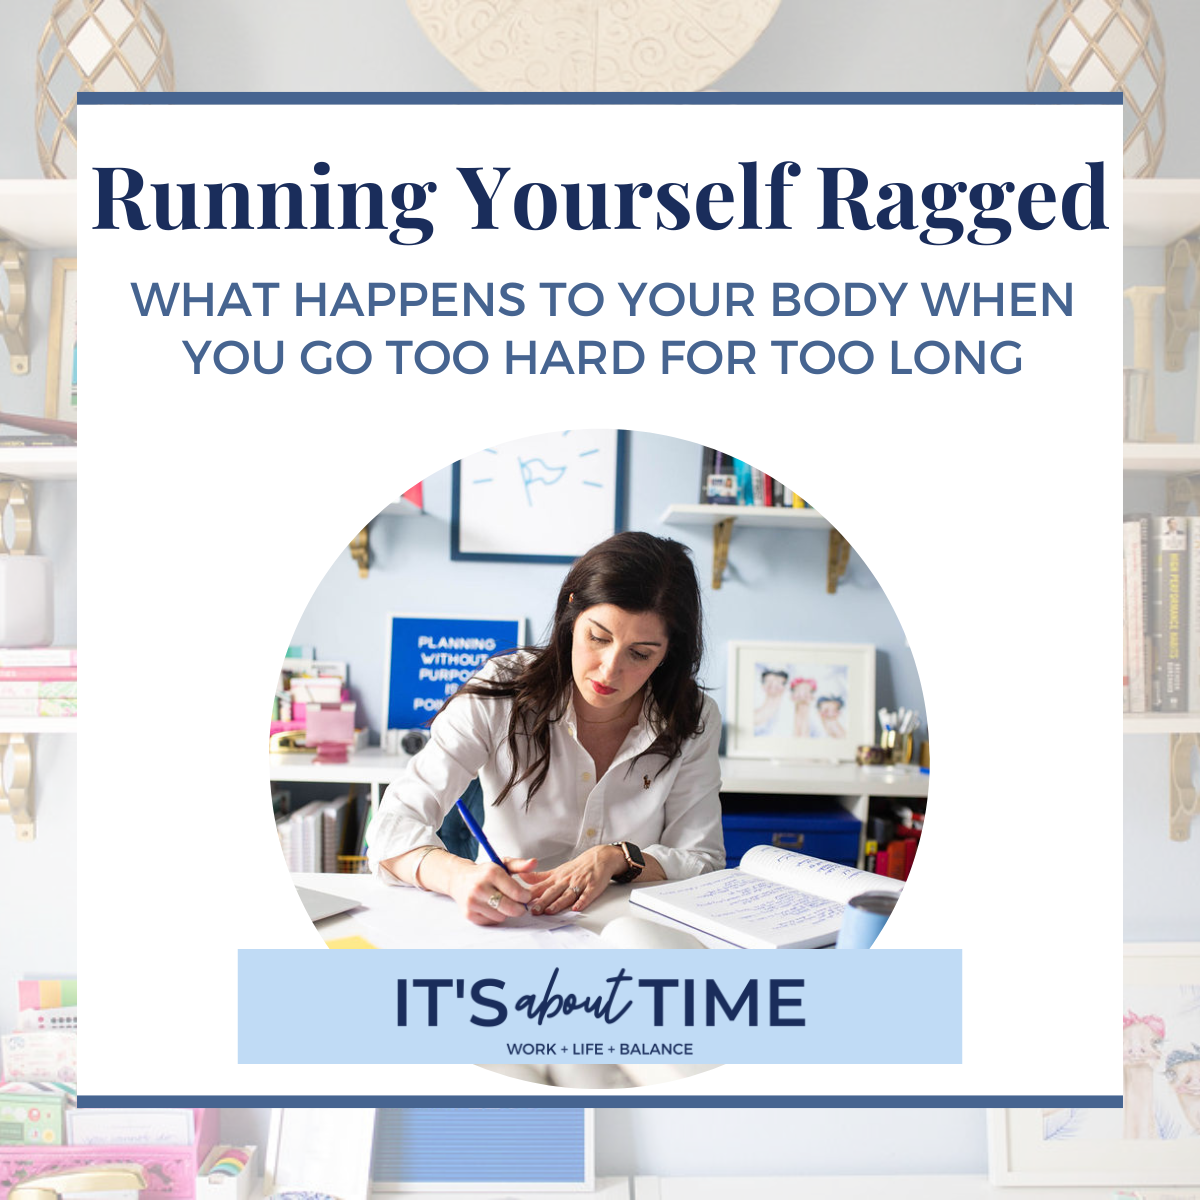 Are you running yourself ragged?